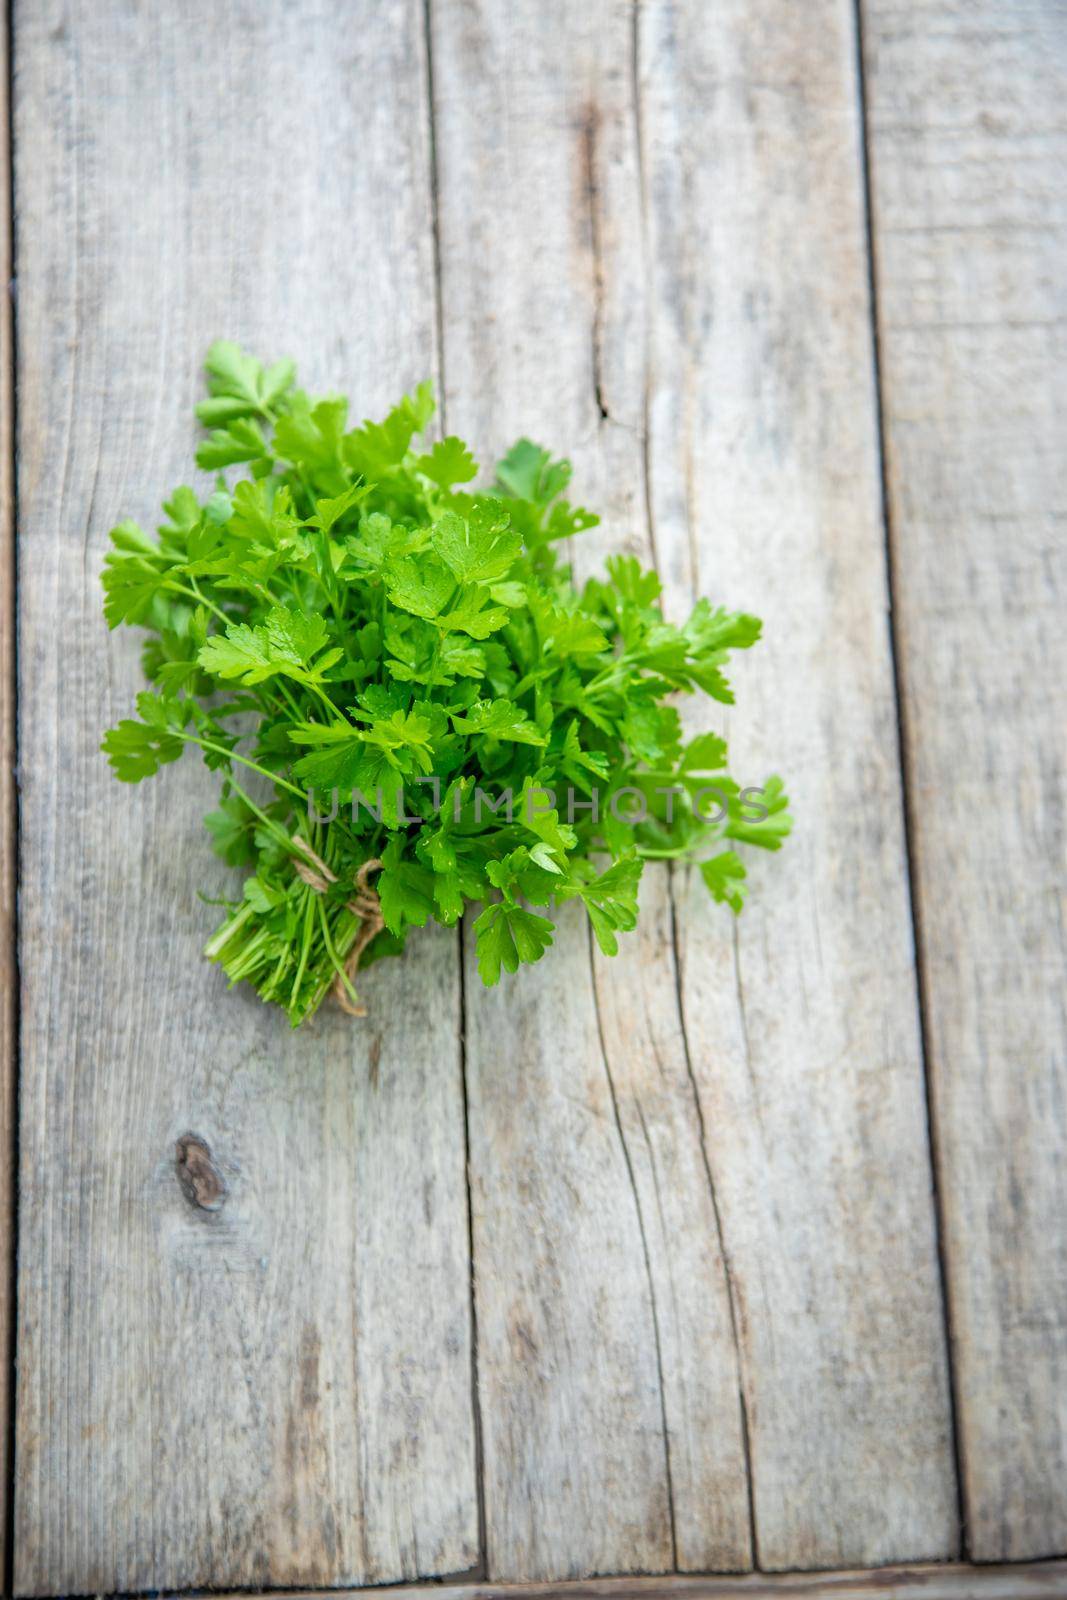 Fresh homemade herbs from the parsley garden. Selective focus. nature.